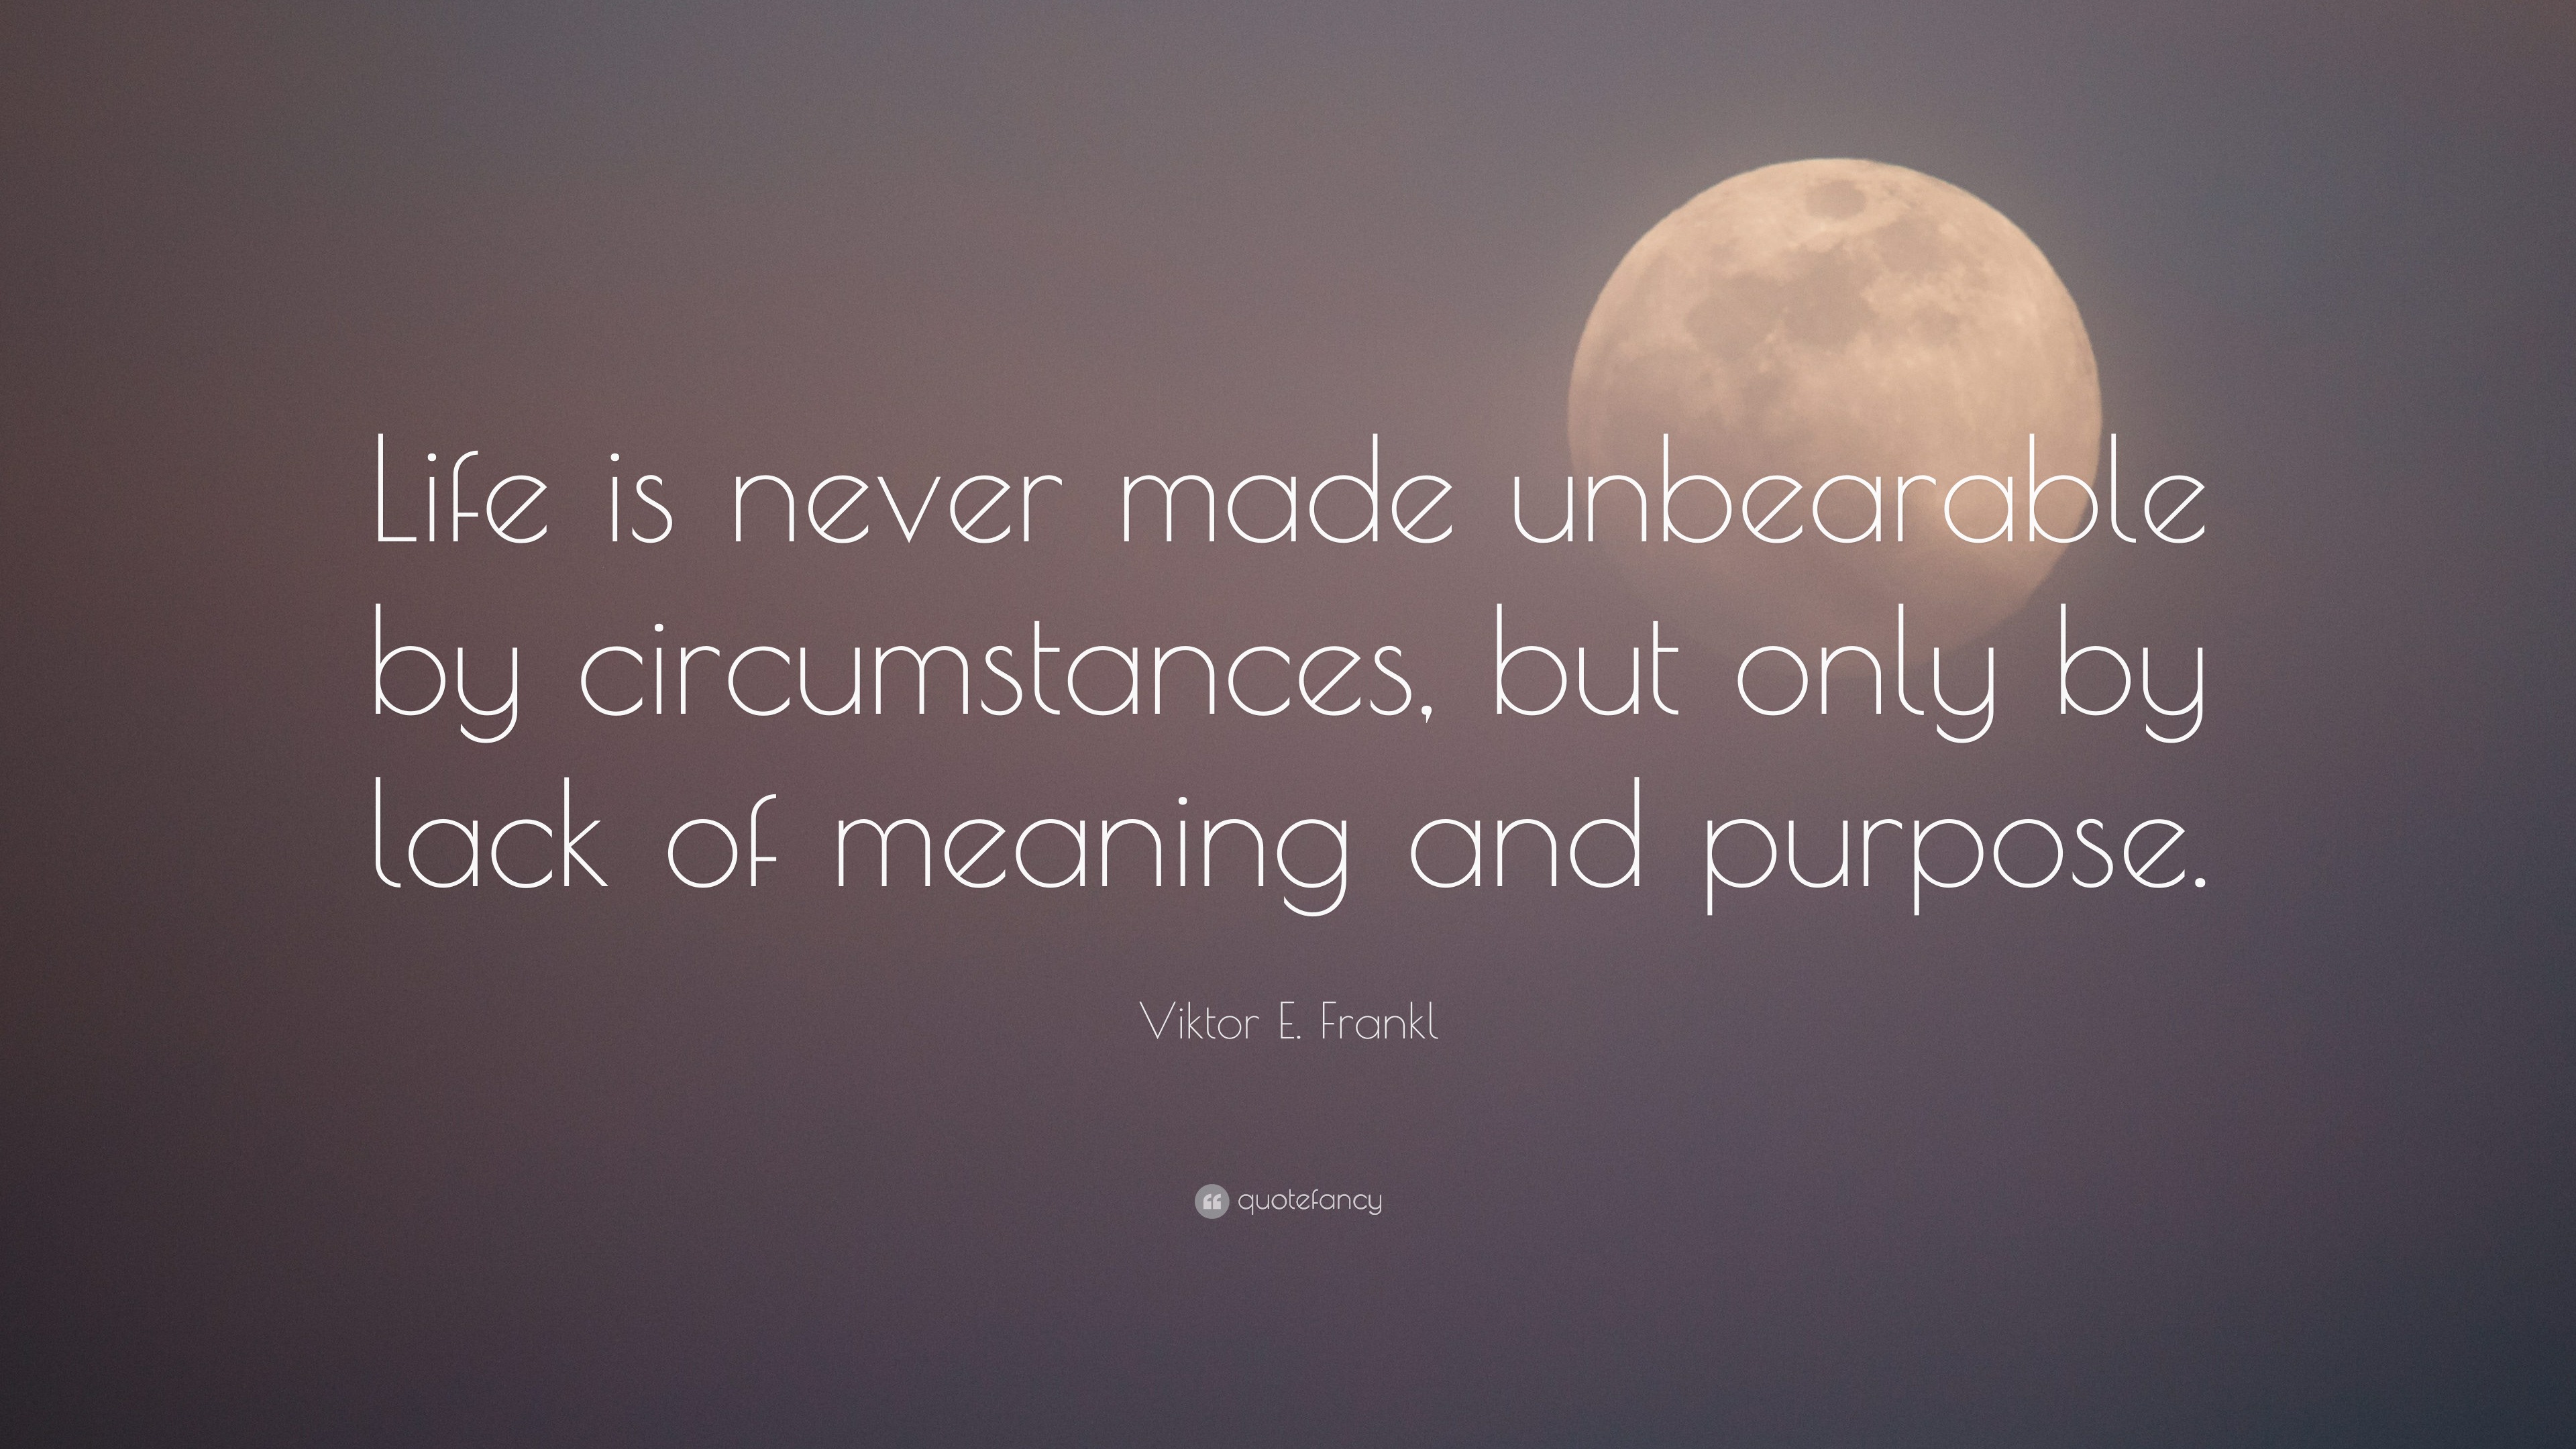 Viktor E. Frankl Quote: “Life is never made unbearable by circumstances ...